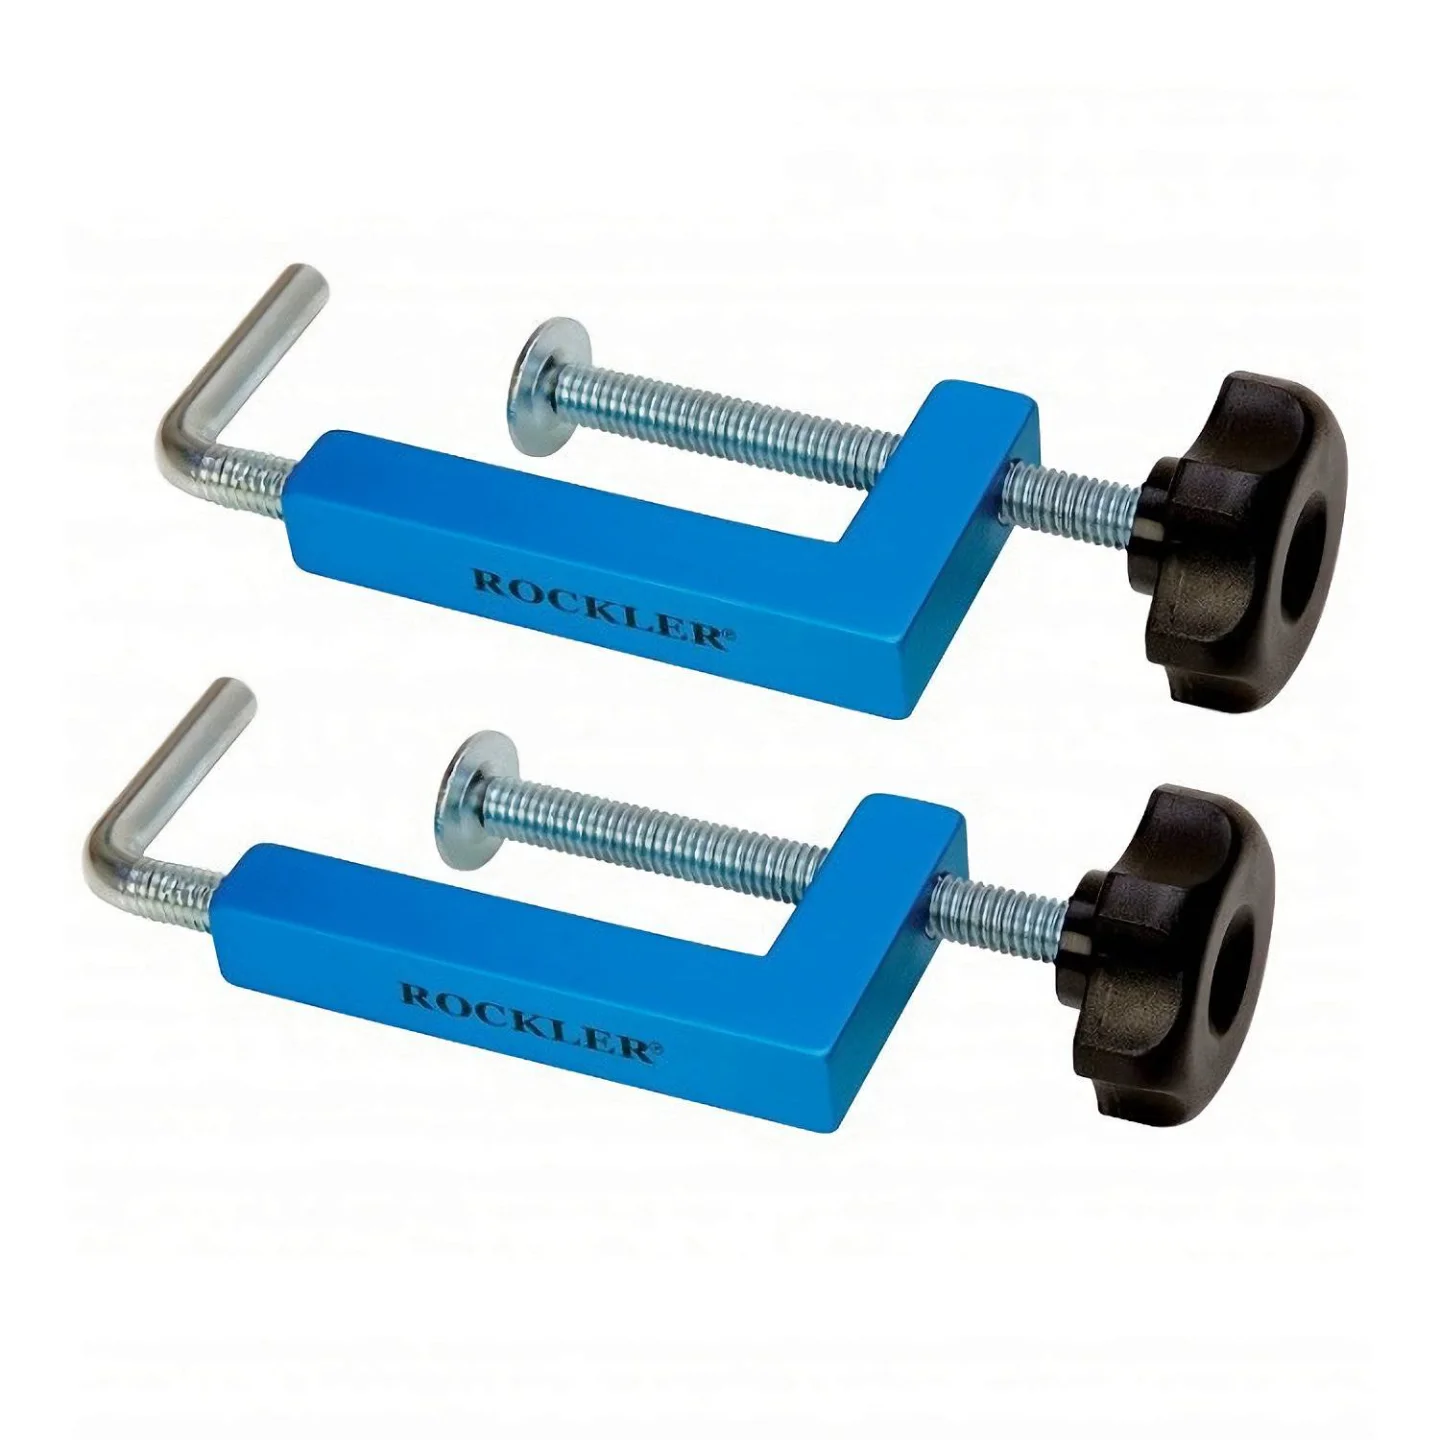 universal-fence-clamps-rockler.